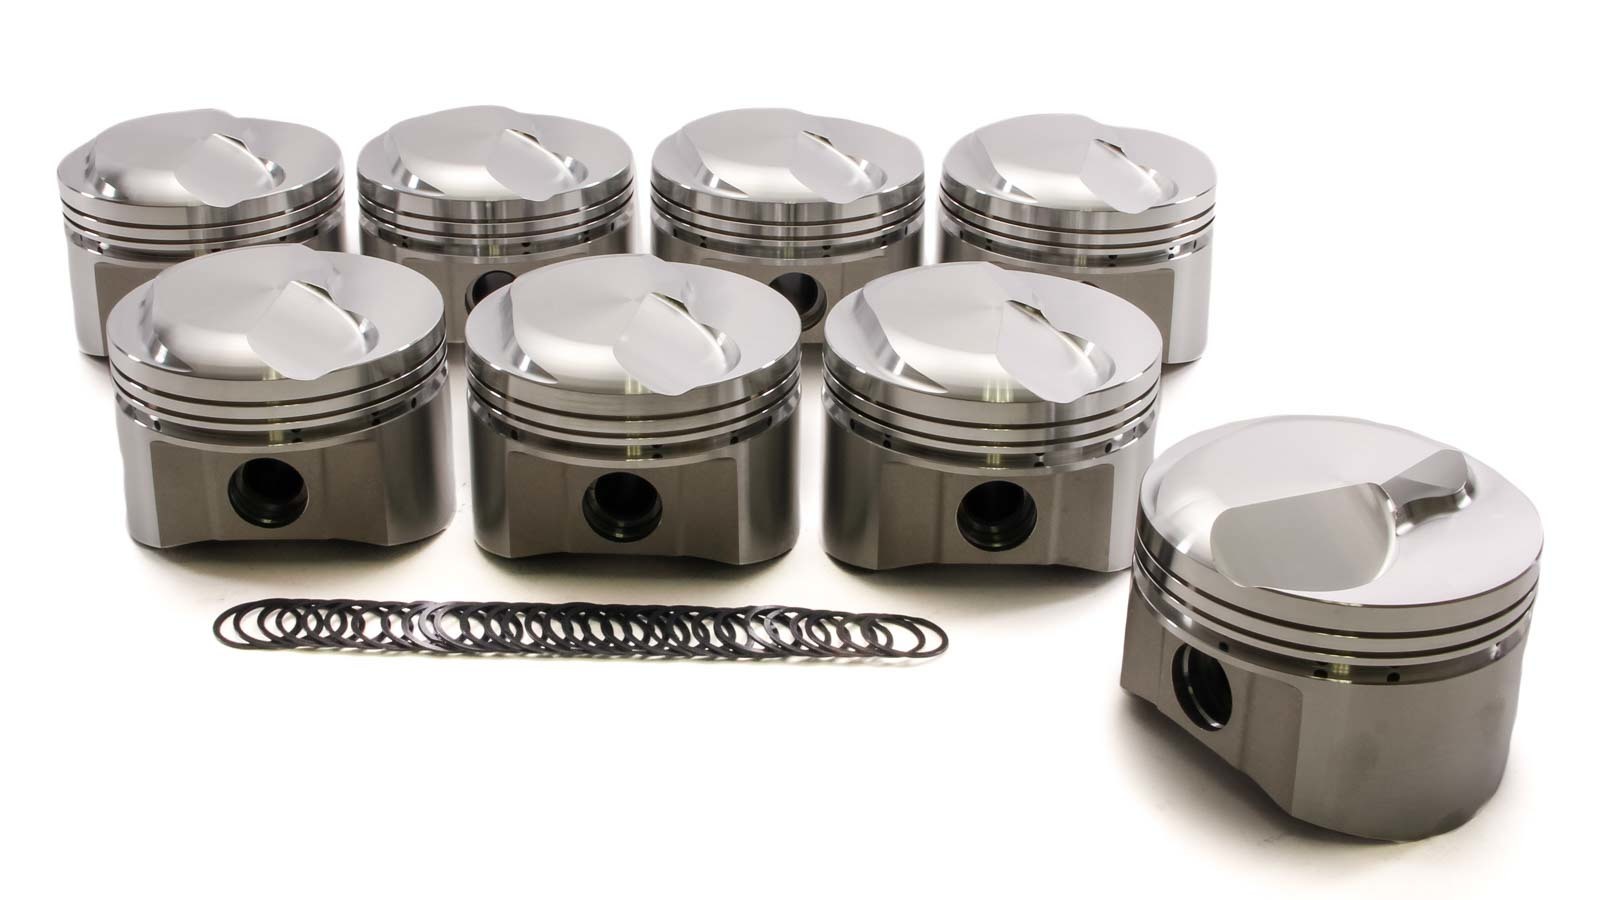 SRP Pistons 212134 Piston, BBC Small Dome Profile, Forged, 4.310 in Bore, 1/16 x 1/16 x 3/16 in Ring Grooves, Plus 29.00 cc, Big Block Chevy, Set of 8